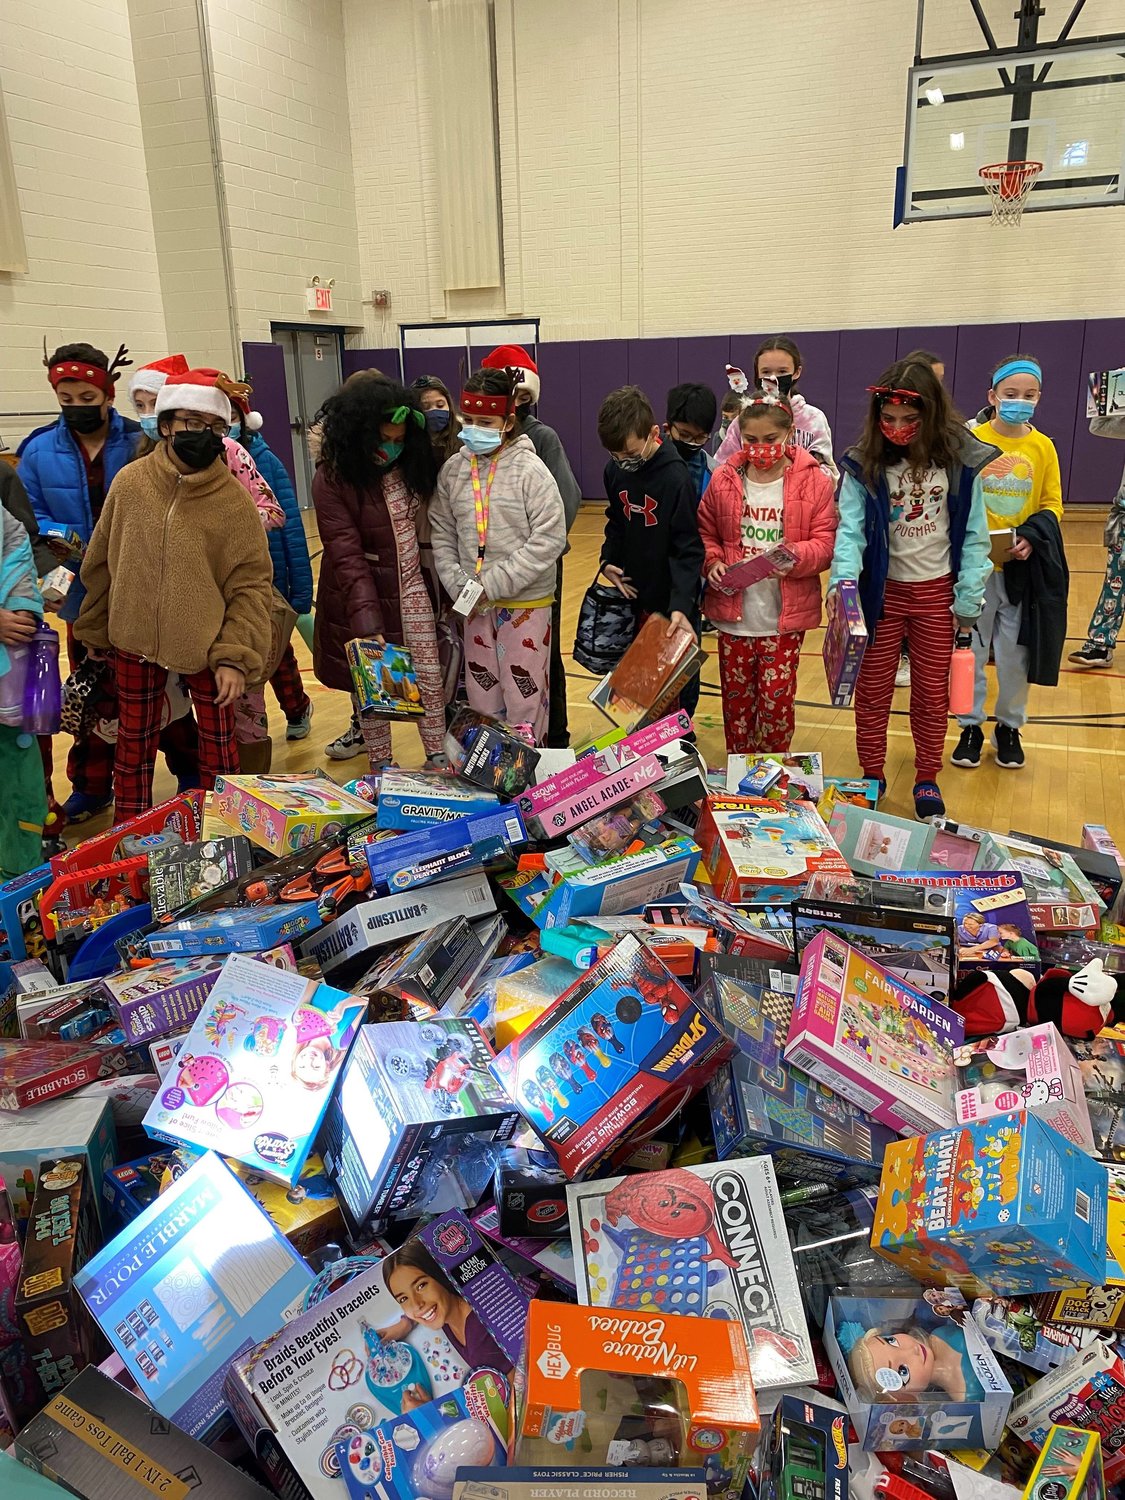 Over 20 bags of toys were collected and set to be donated.